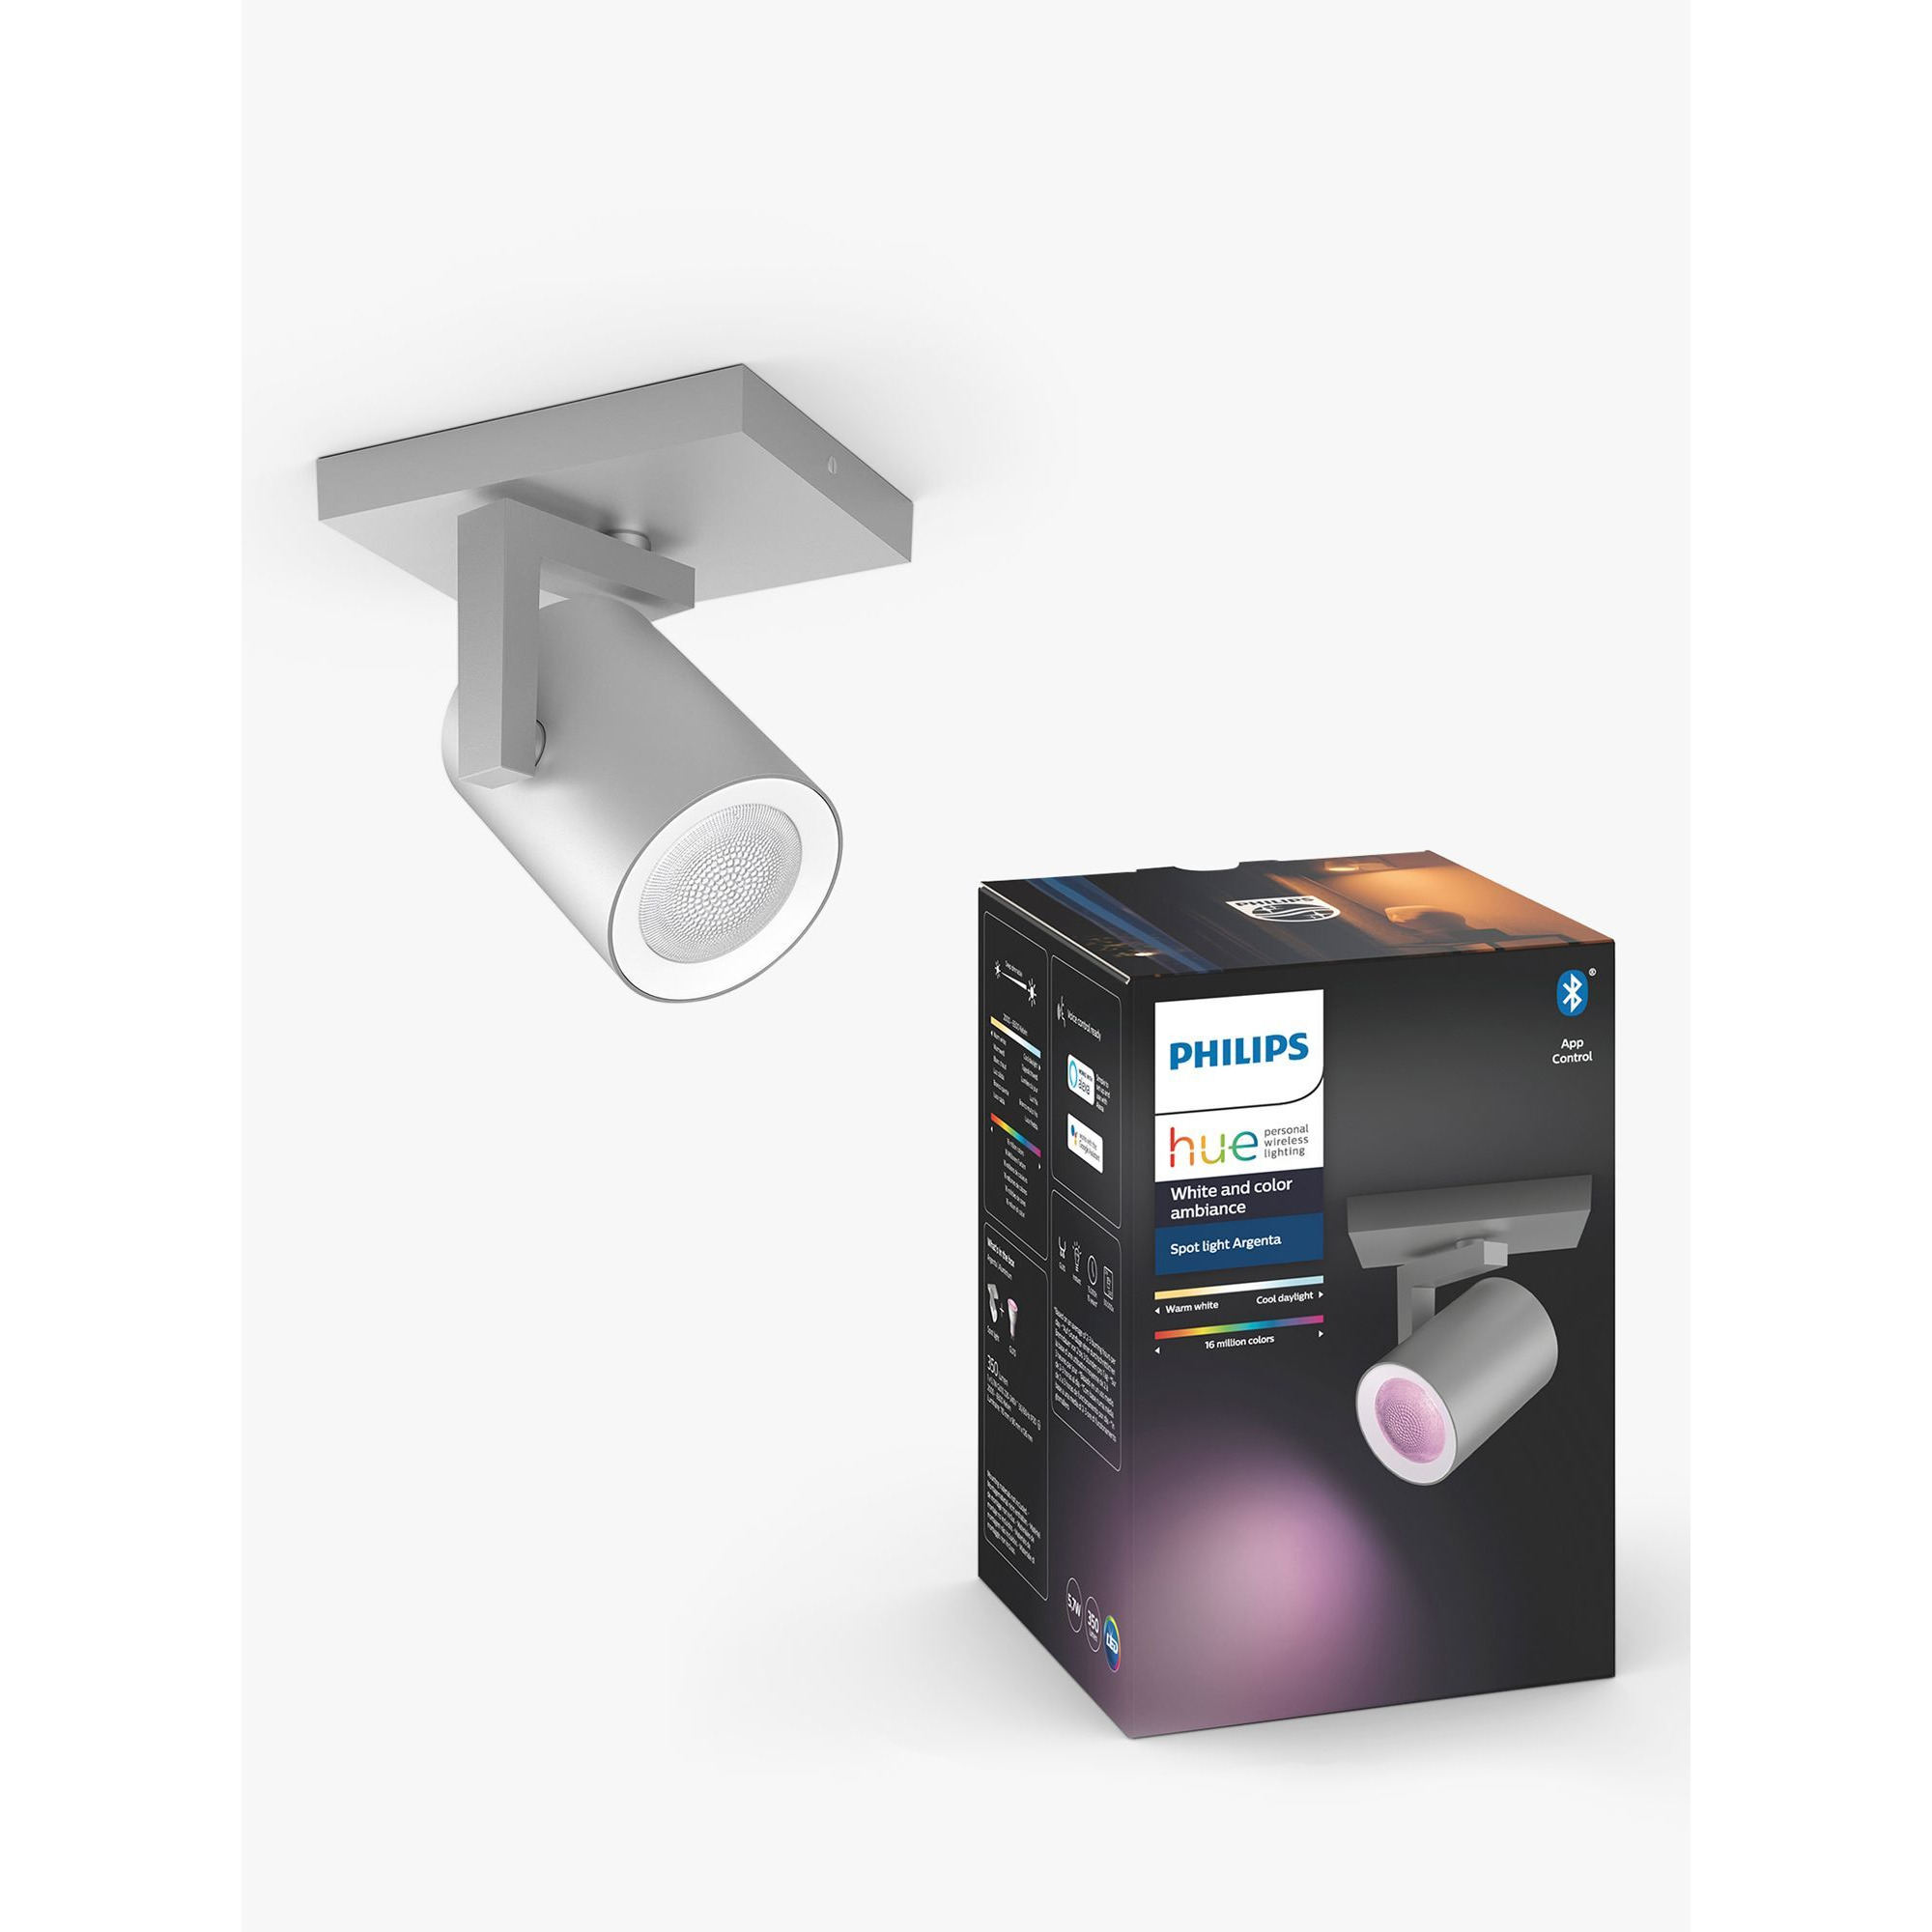 Philips Hue White and Colour Ambiance Argenta LED Smart Single Spotlight with Bluetooth, Grey - image 1